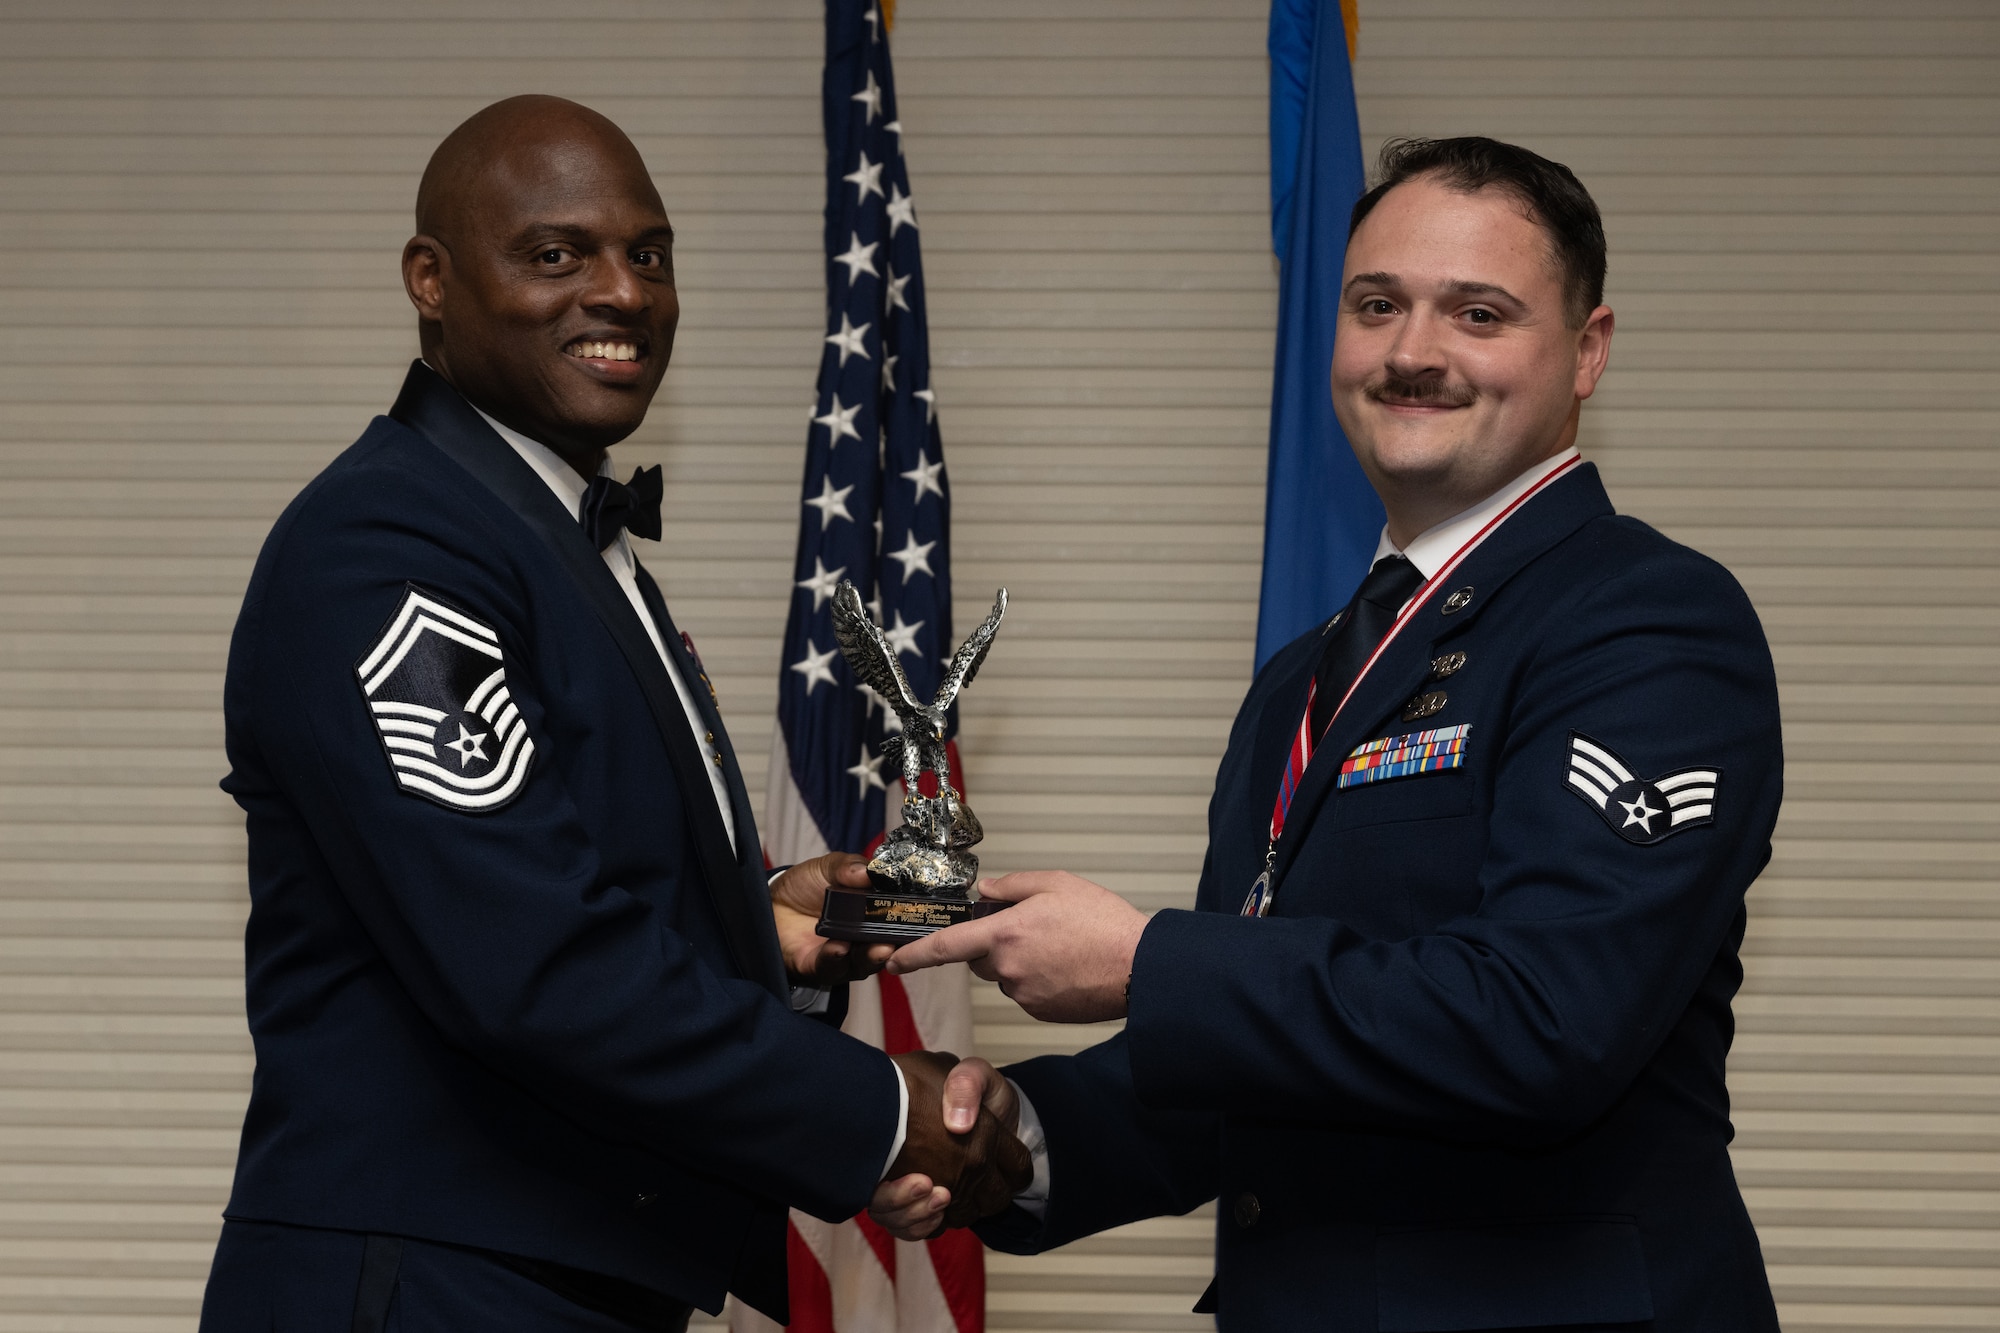 U.S. Air Force Senior Airman William Johnson, 4th Munitions Squadron training technician, receives the Distinguished Graduate Award from Senior Master Sgt. Torrey Byrd, Maintenance Operations flight weapons superintendent, during the Airman Leadership School class 24-D graduation ceremony at Seymour Johnson Air Force Base, North Carolina, May 2, 2024. Students who received the Distinguished Graduate Award displayed effective teamwork, academic excellence and leadership skills. (U.S. Air Force photo by Airman Megan Cusmano)